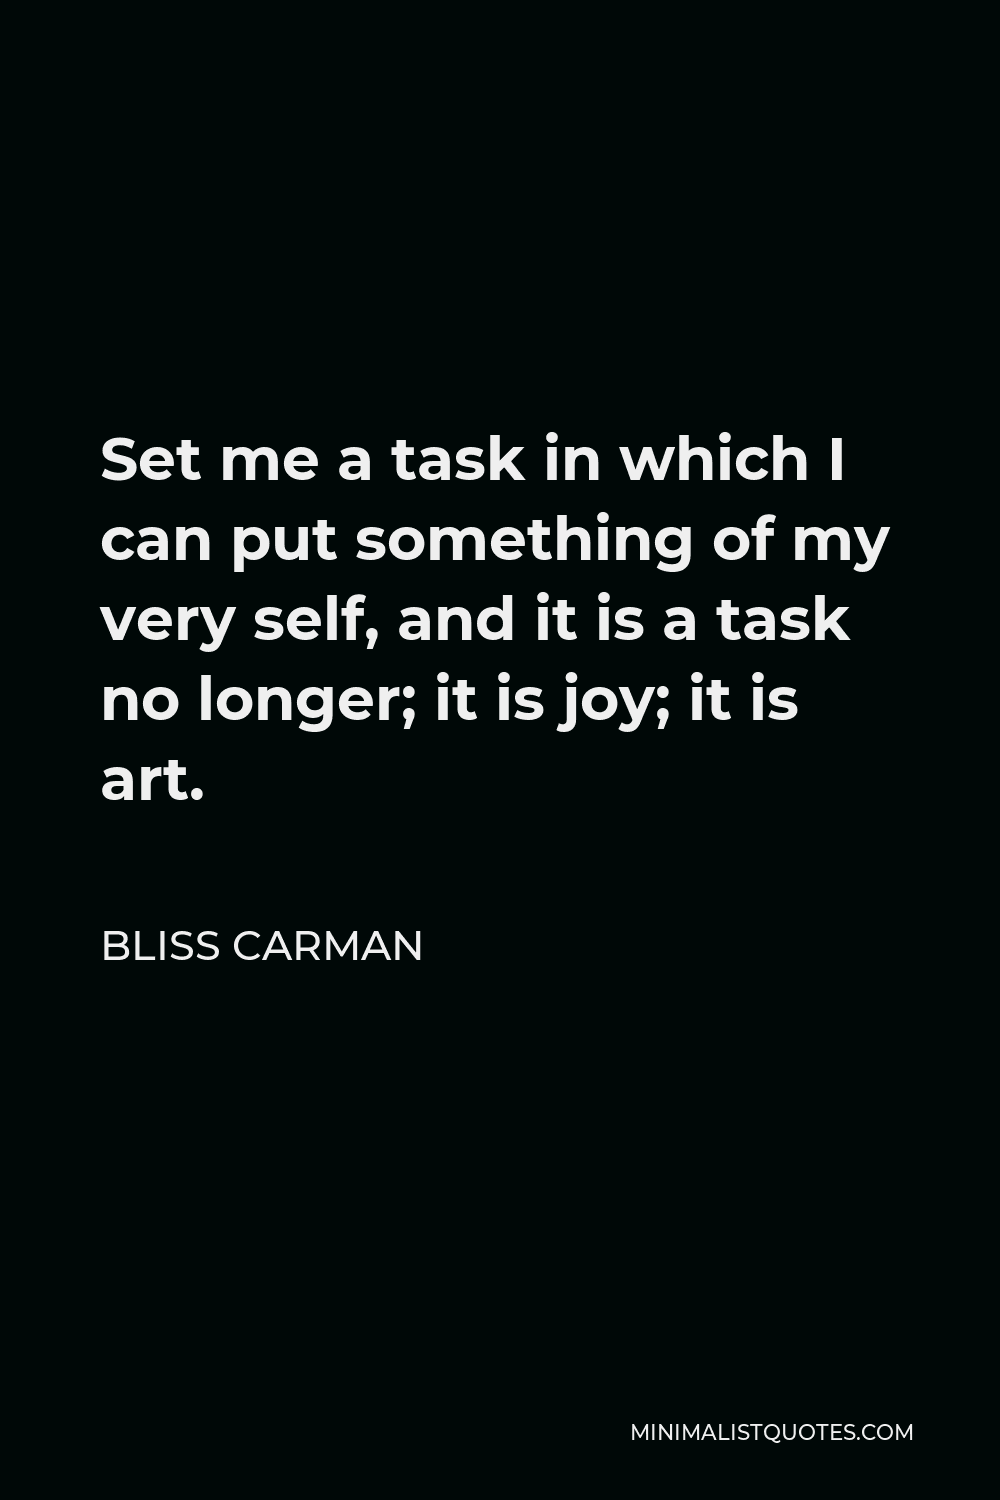 Bliss Carman Quote - Set me a task in which I can put something of my very self, and it is a task no longer; it is joy; it is art.